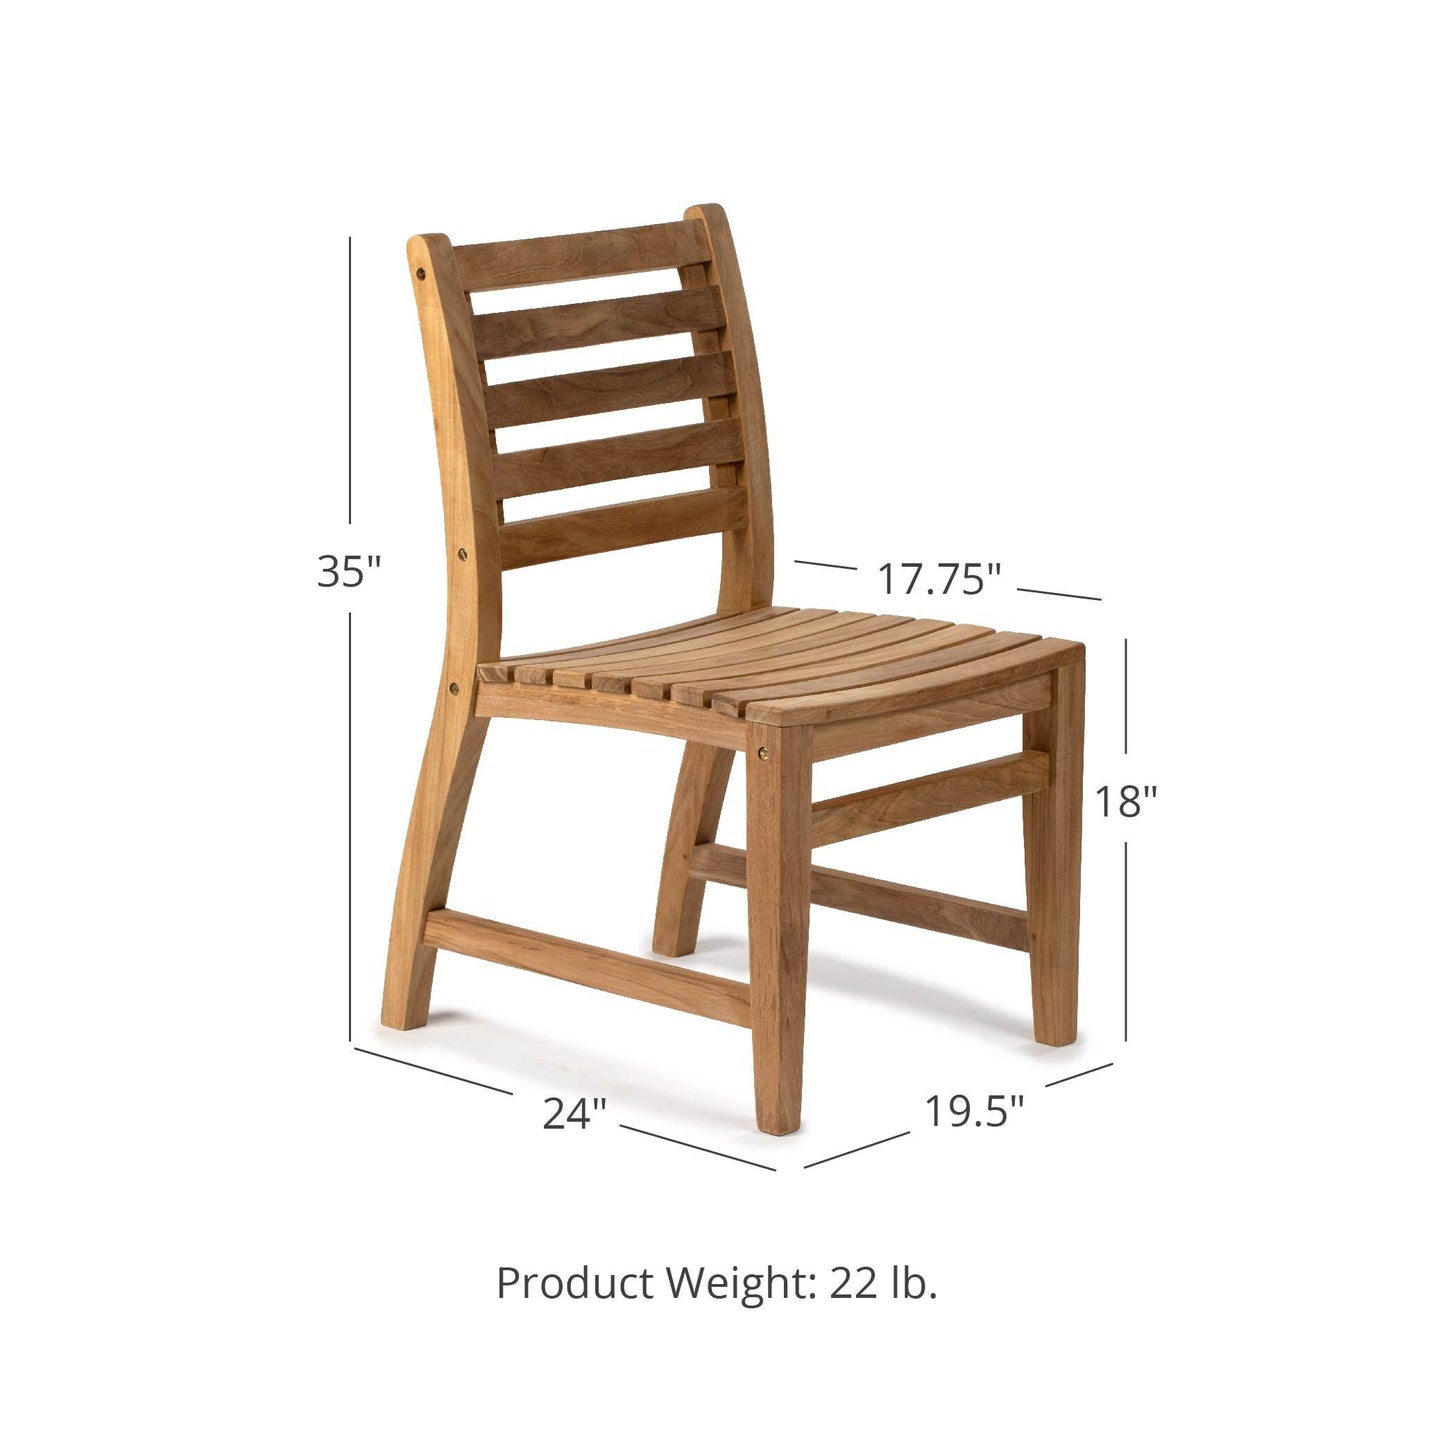 Sandhill Grade A Teak Dining Chair with Optional Arms - Optional Arms: No Arms | No Arms - view 8